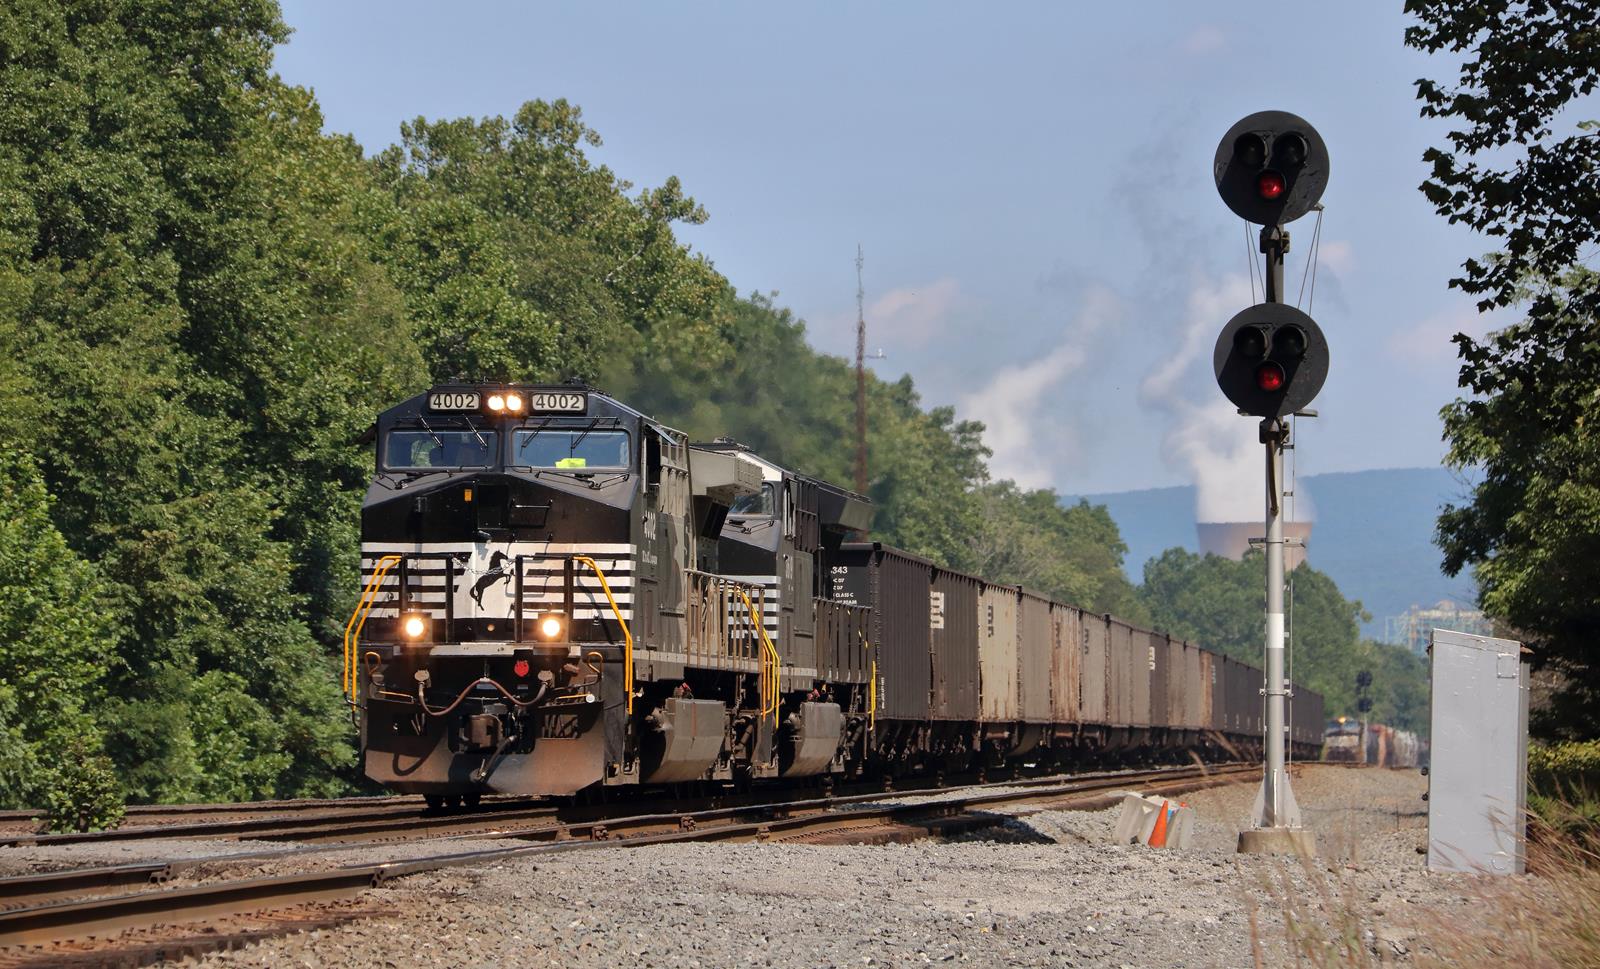 NS 4002 is a class GE AC44C6M and  is pictured in New Florence, Pennsylvania, USA.  This was taken along the NS Pittsburgh Line on the Norfolk Southern. Photo Copyright: Marc Lingenfelter uploaded to Railroad Gallery on 11/24/2022. This photograph of NS 4002 was taken on Sunday, August 20, 2017. All Rights Reserved. 